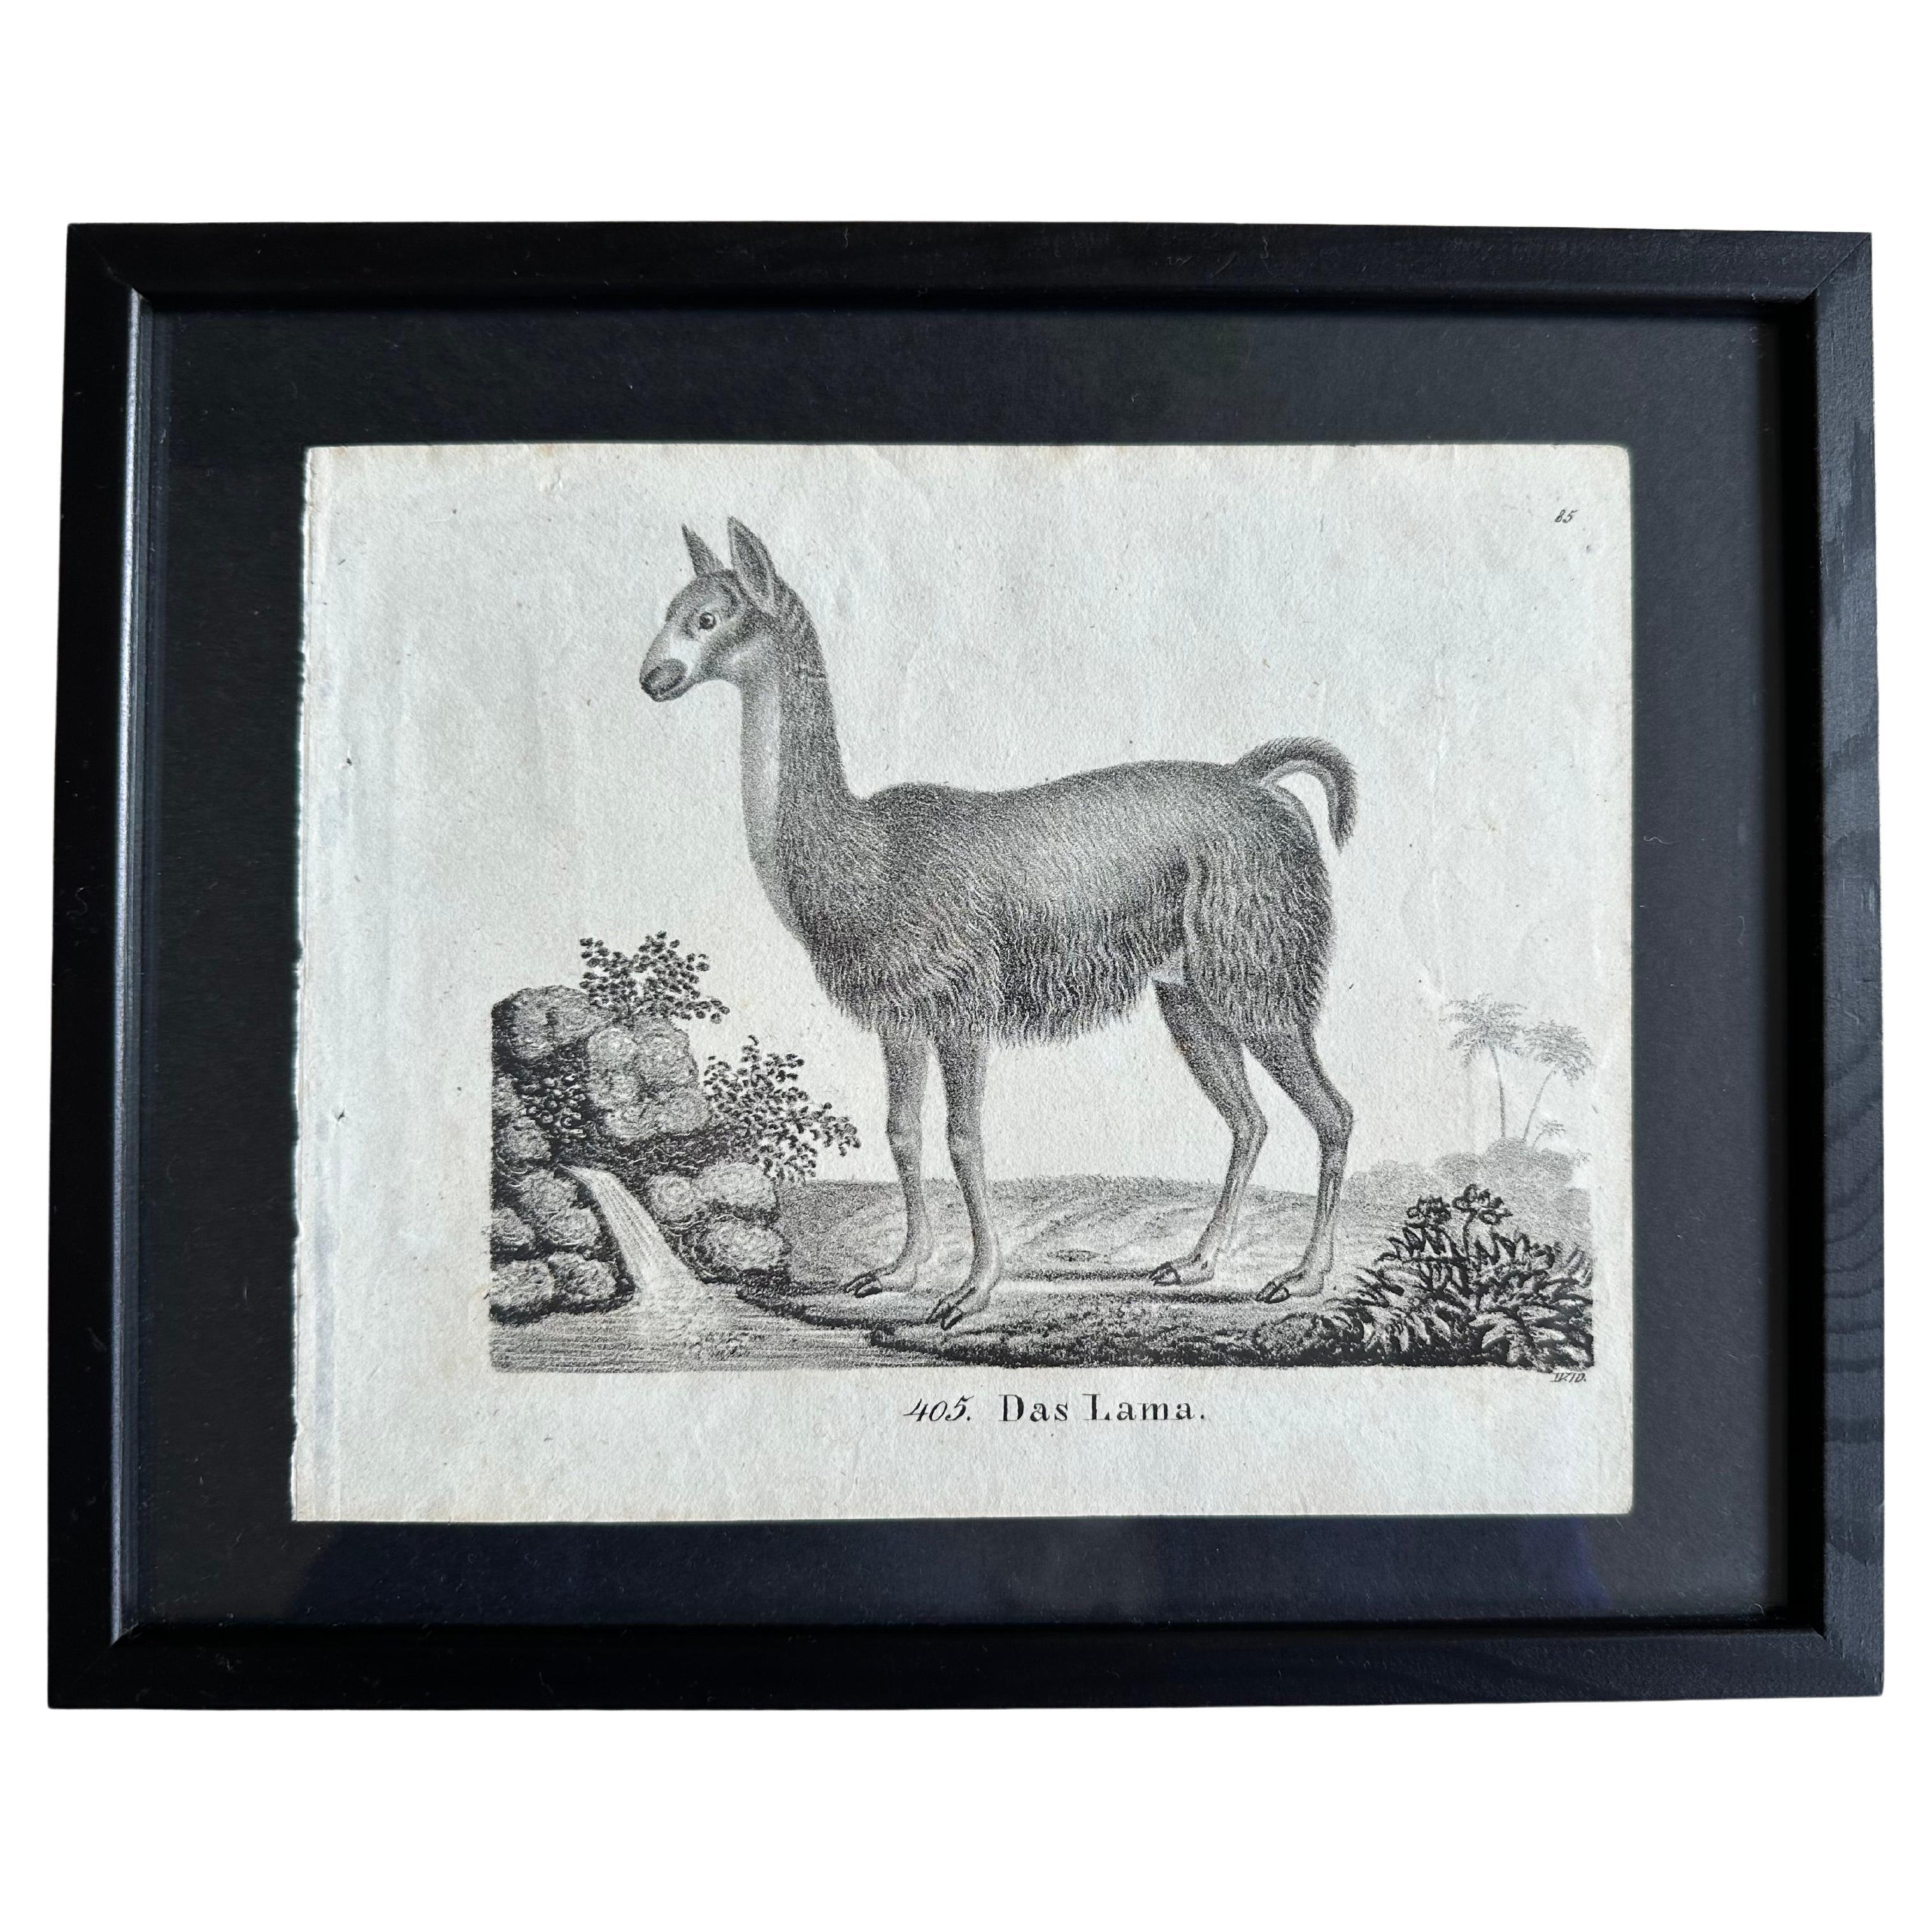 Zoological Original Lithograph Featuring "the Lama" from 1831-35